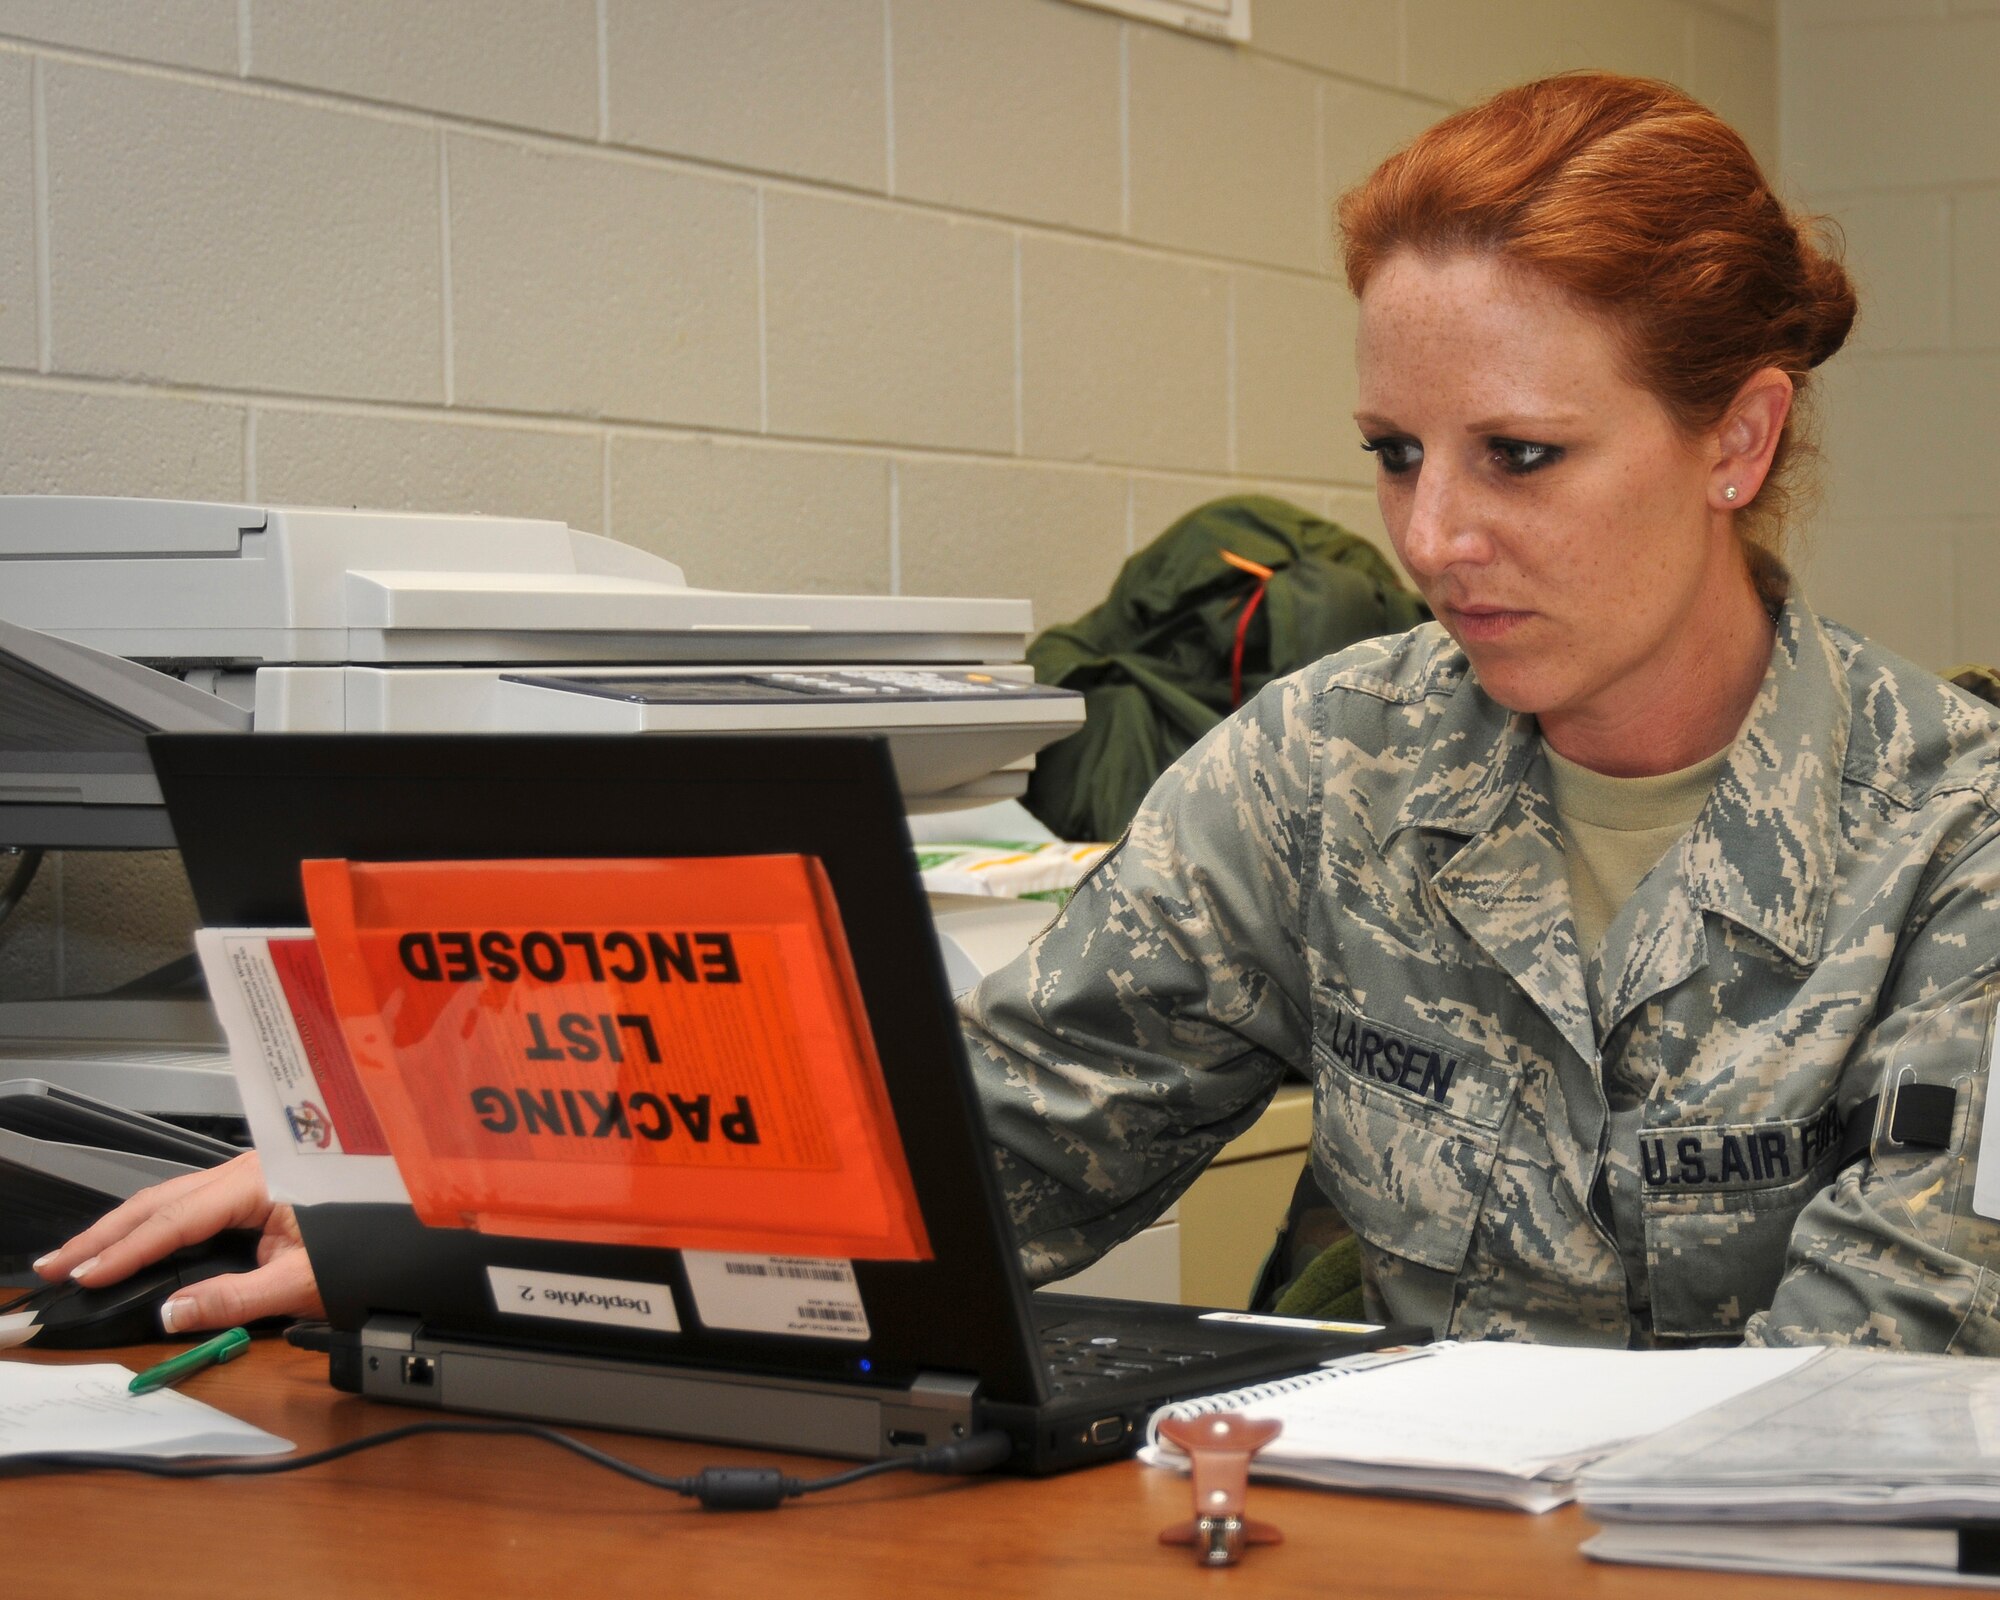 Master Sgt. Melanie Larsen, a paying agent from the Kentucky Air Guard's 123rd Airlift Wing Finance Office, reviews Air Force Instructions on May 19, 2010 at the Gulfport Combat Readiness Training Center in Gulfport, Miss. Sergeant Larsen was participating in an Air Mobility Command Operational Readiness Inspection. (U.S. Air Force photo/Tech. Sgt. Dennis Flora) (Released)